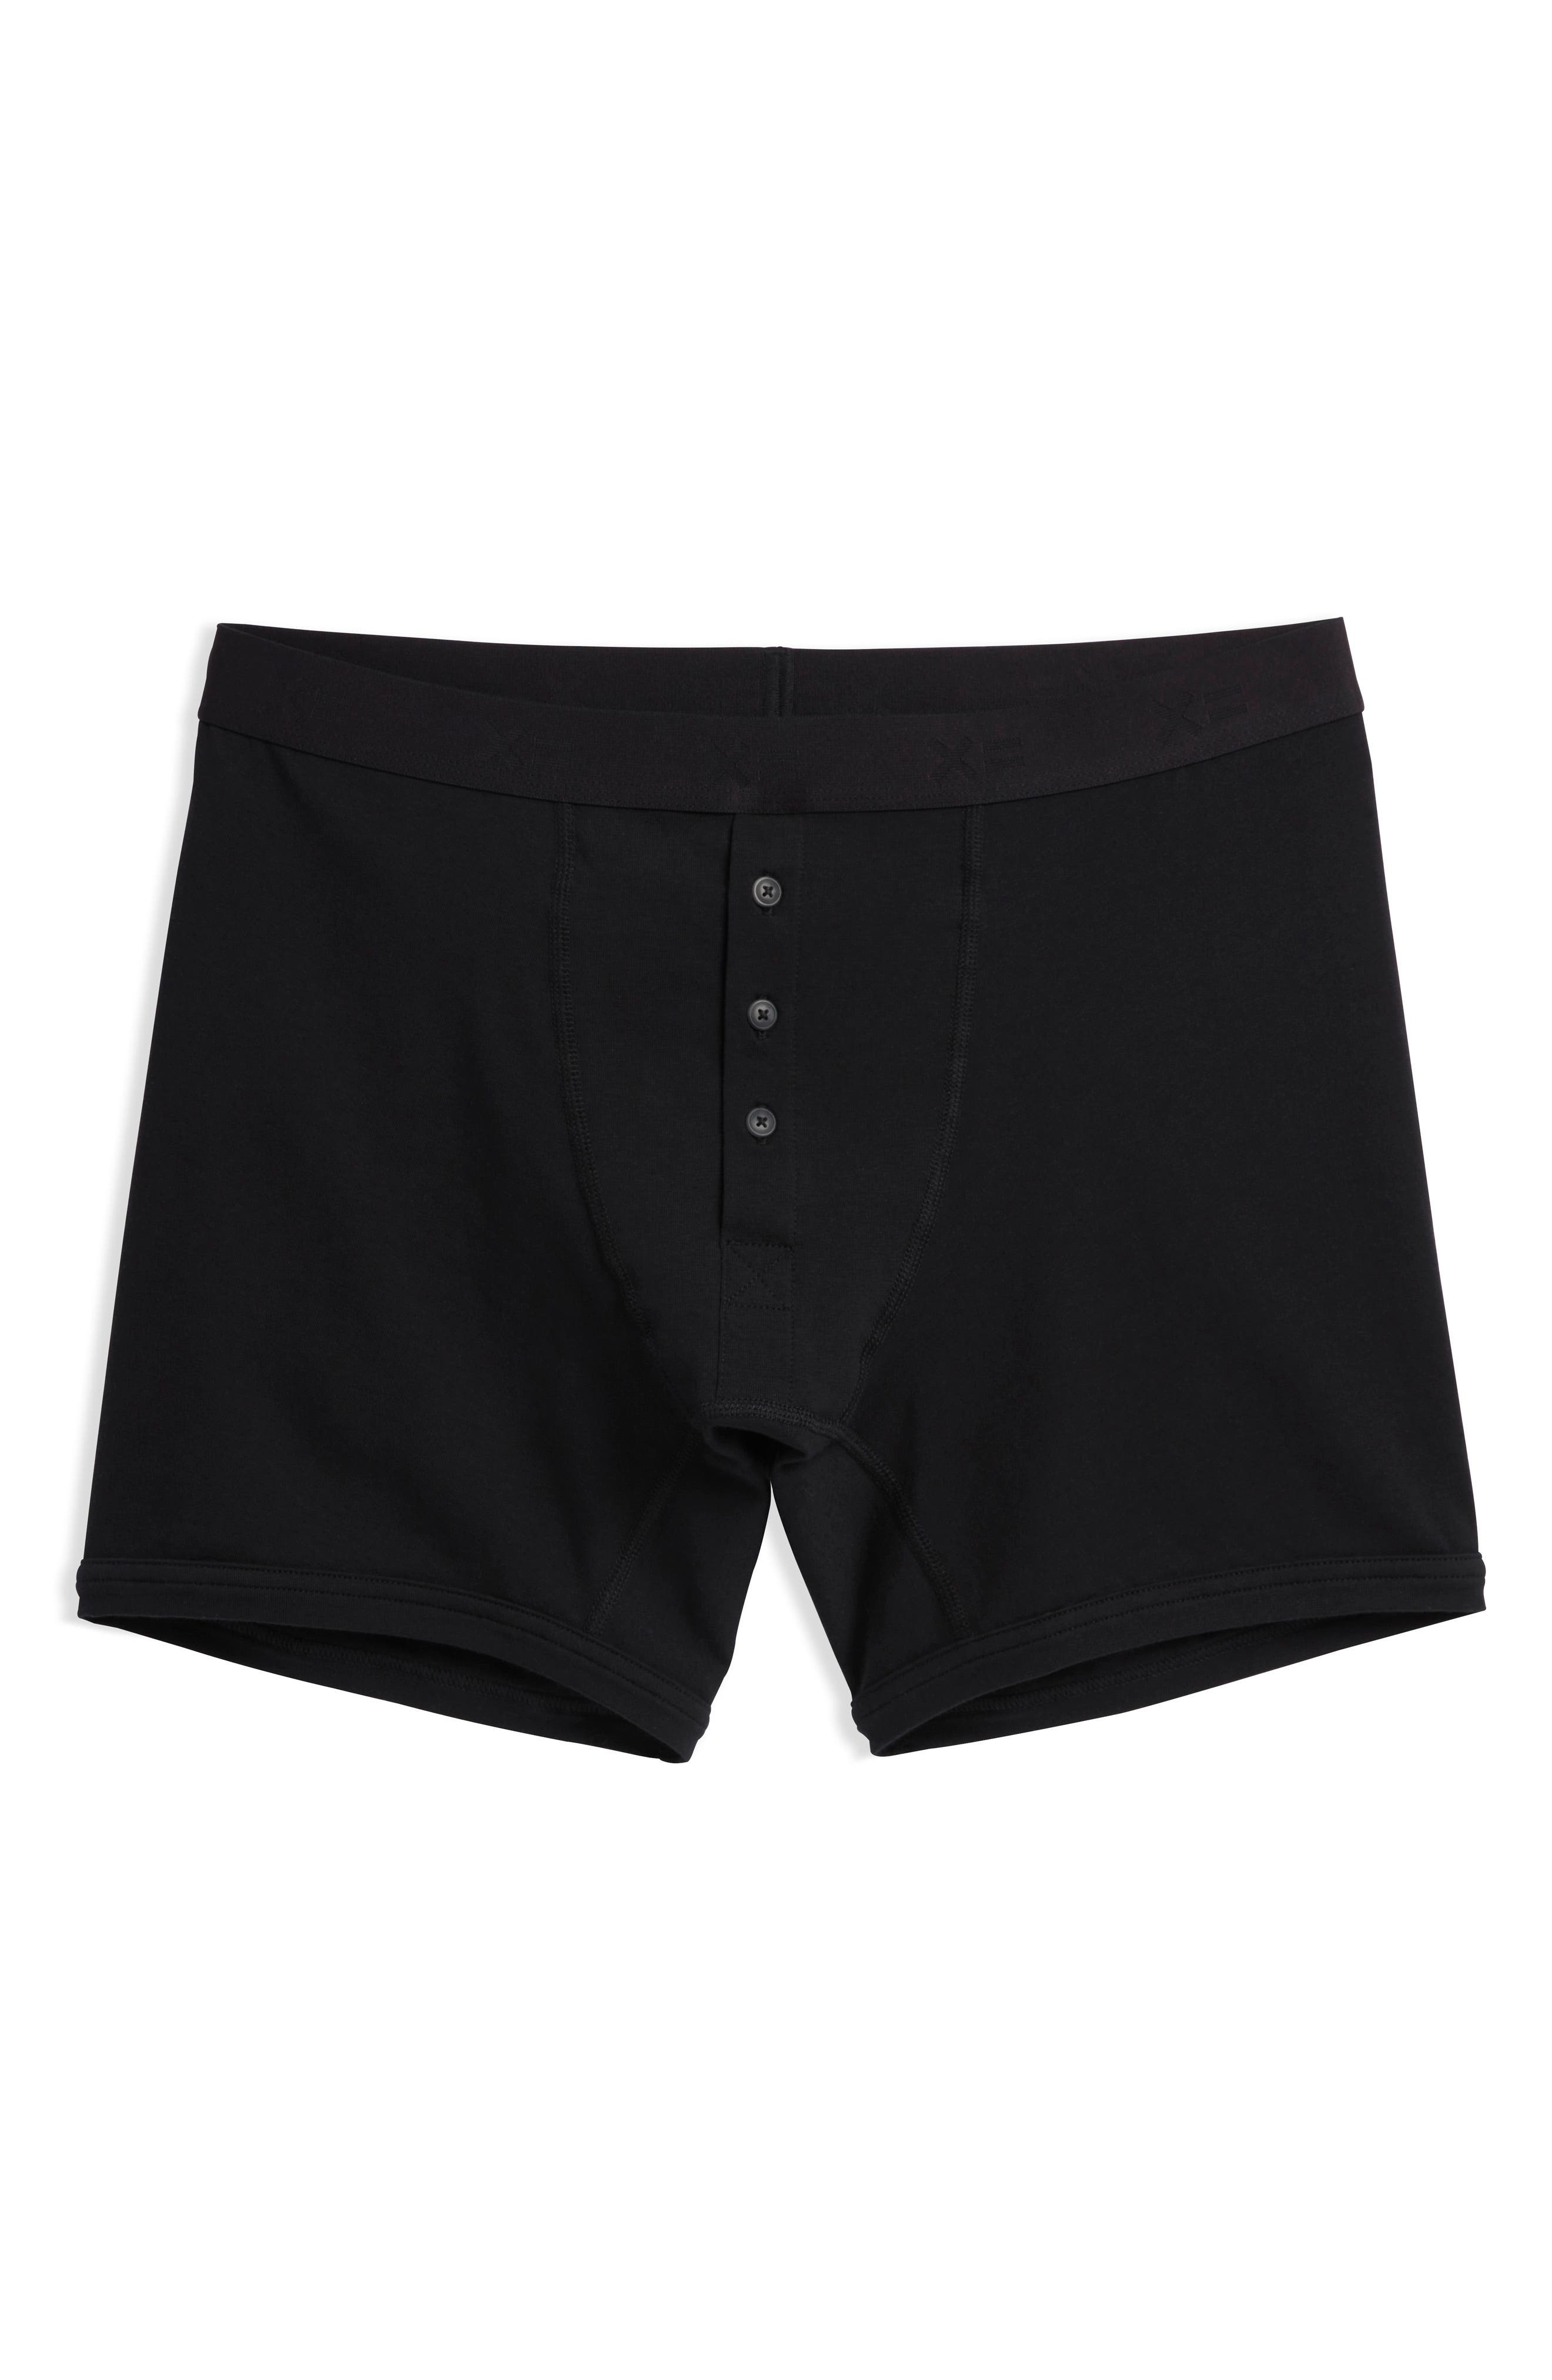 TomboyX 4.5-Inch Trunks, Nordstrom